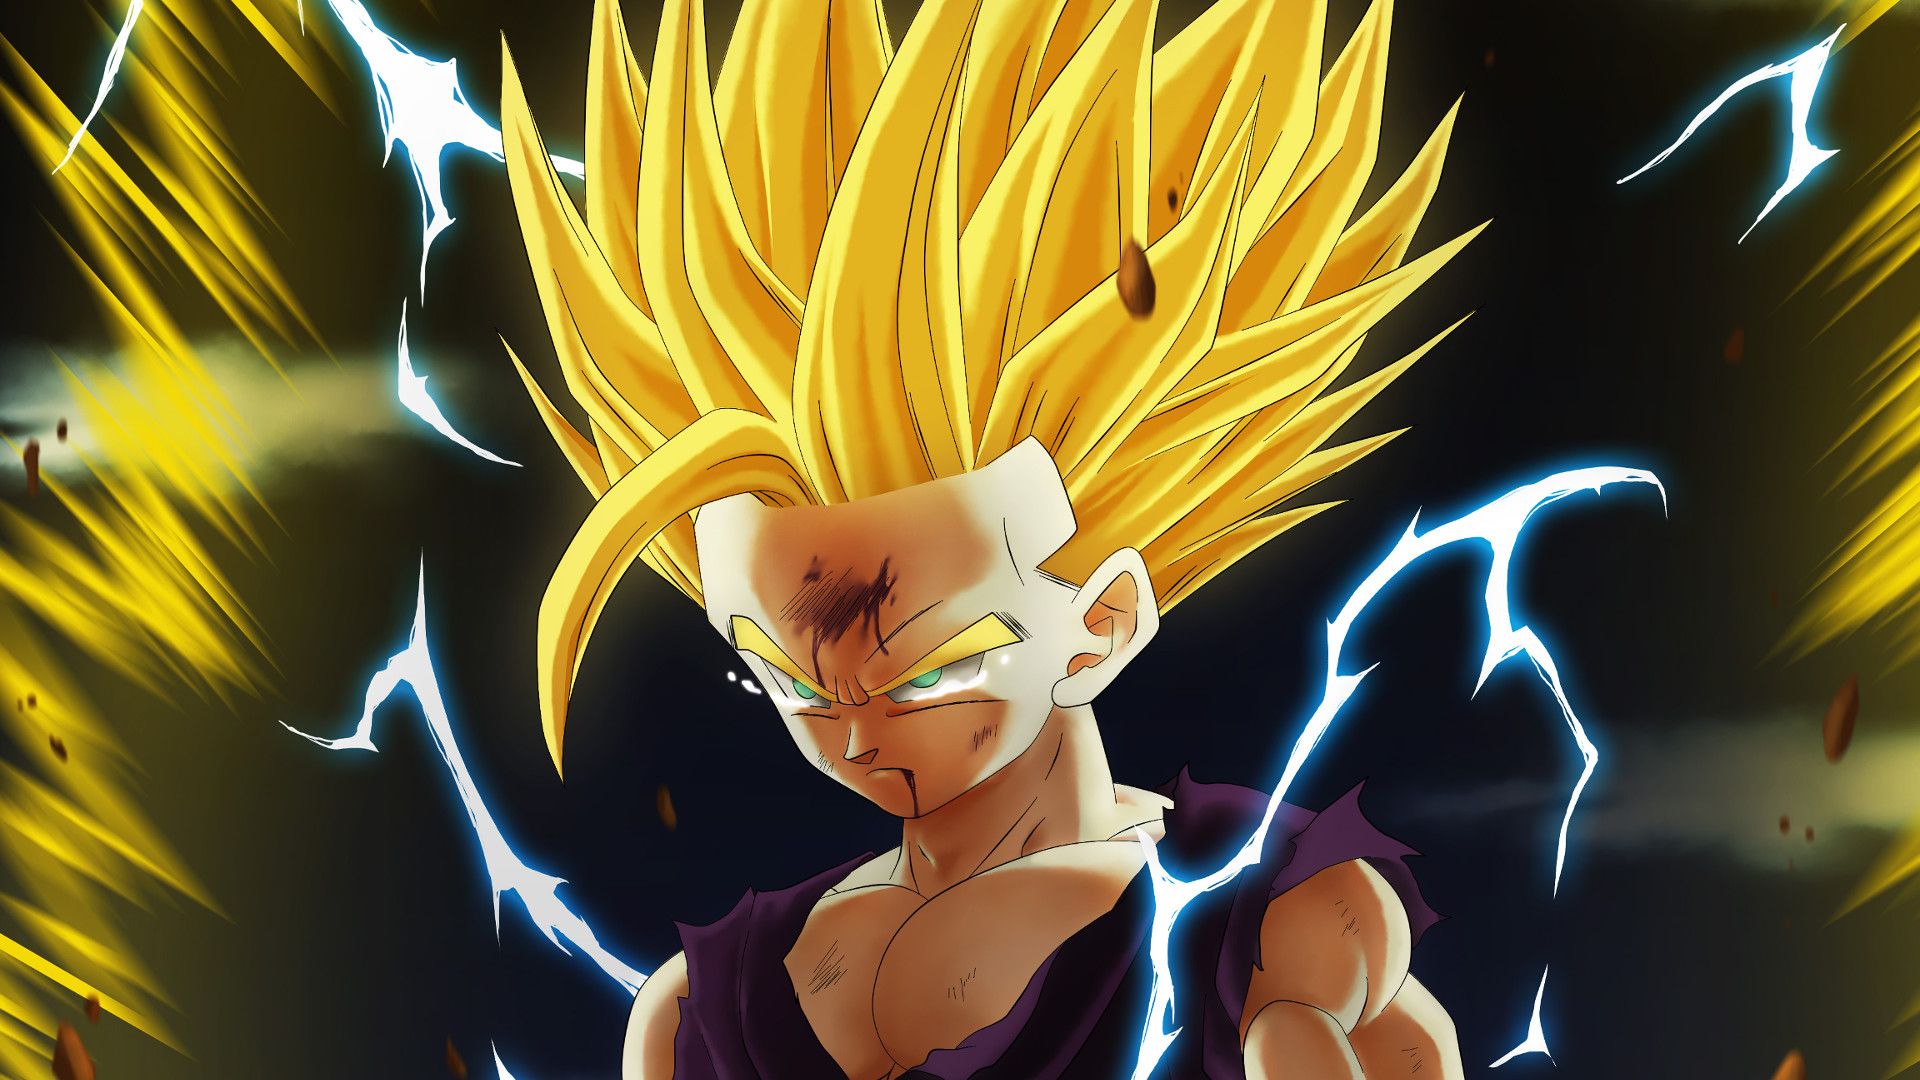 Dragon Ball Z Live Wallpapers For PC Data